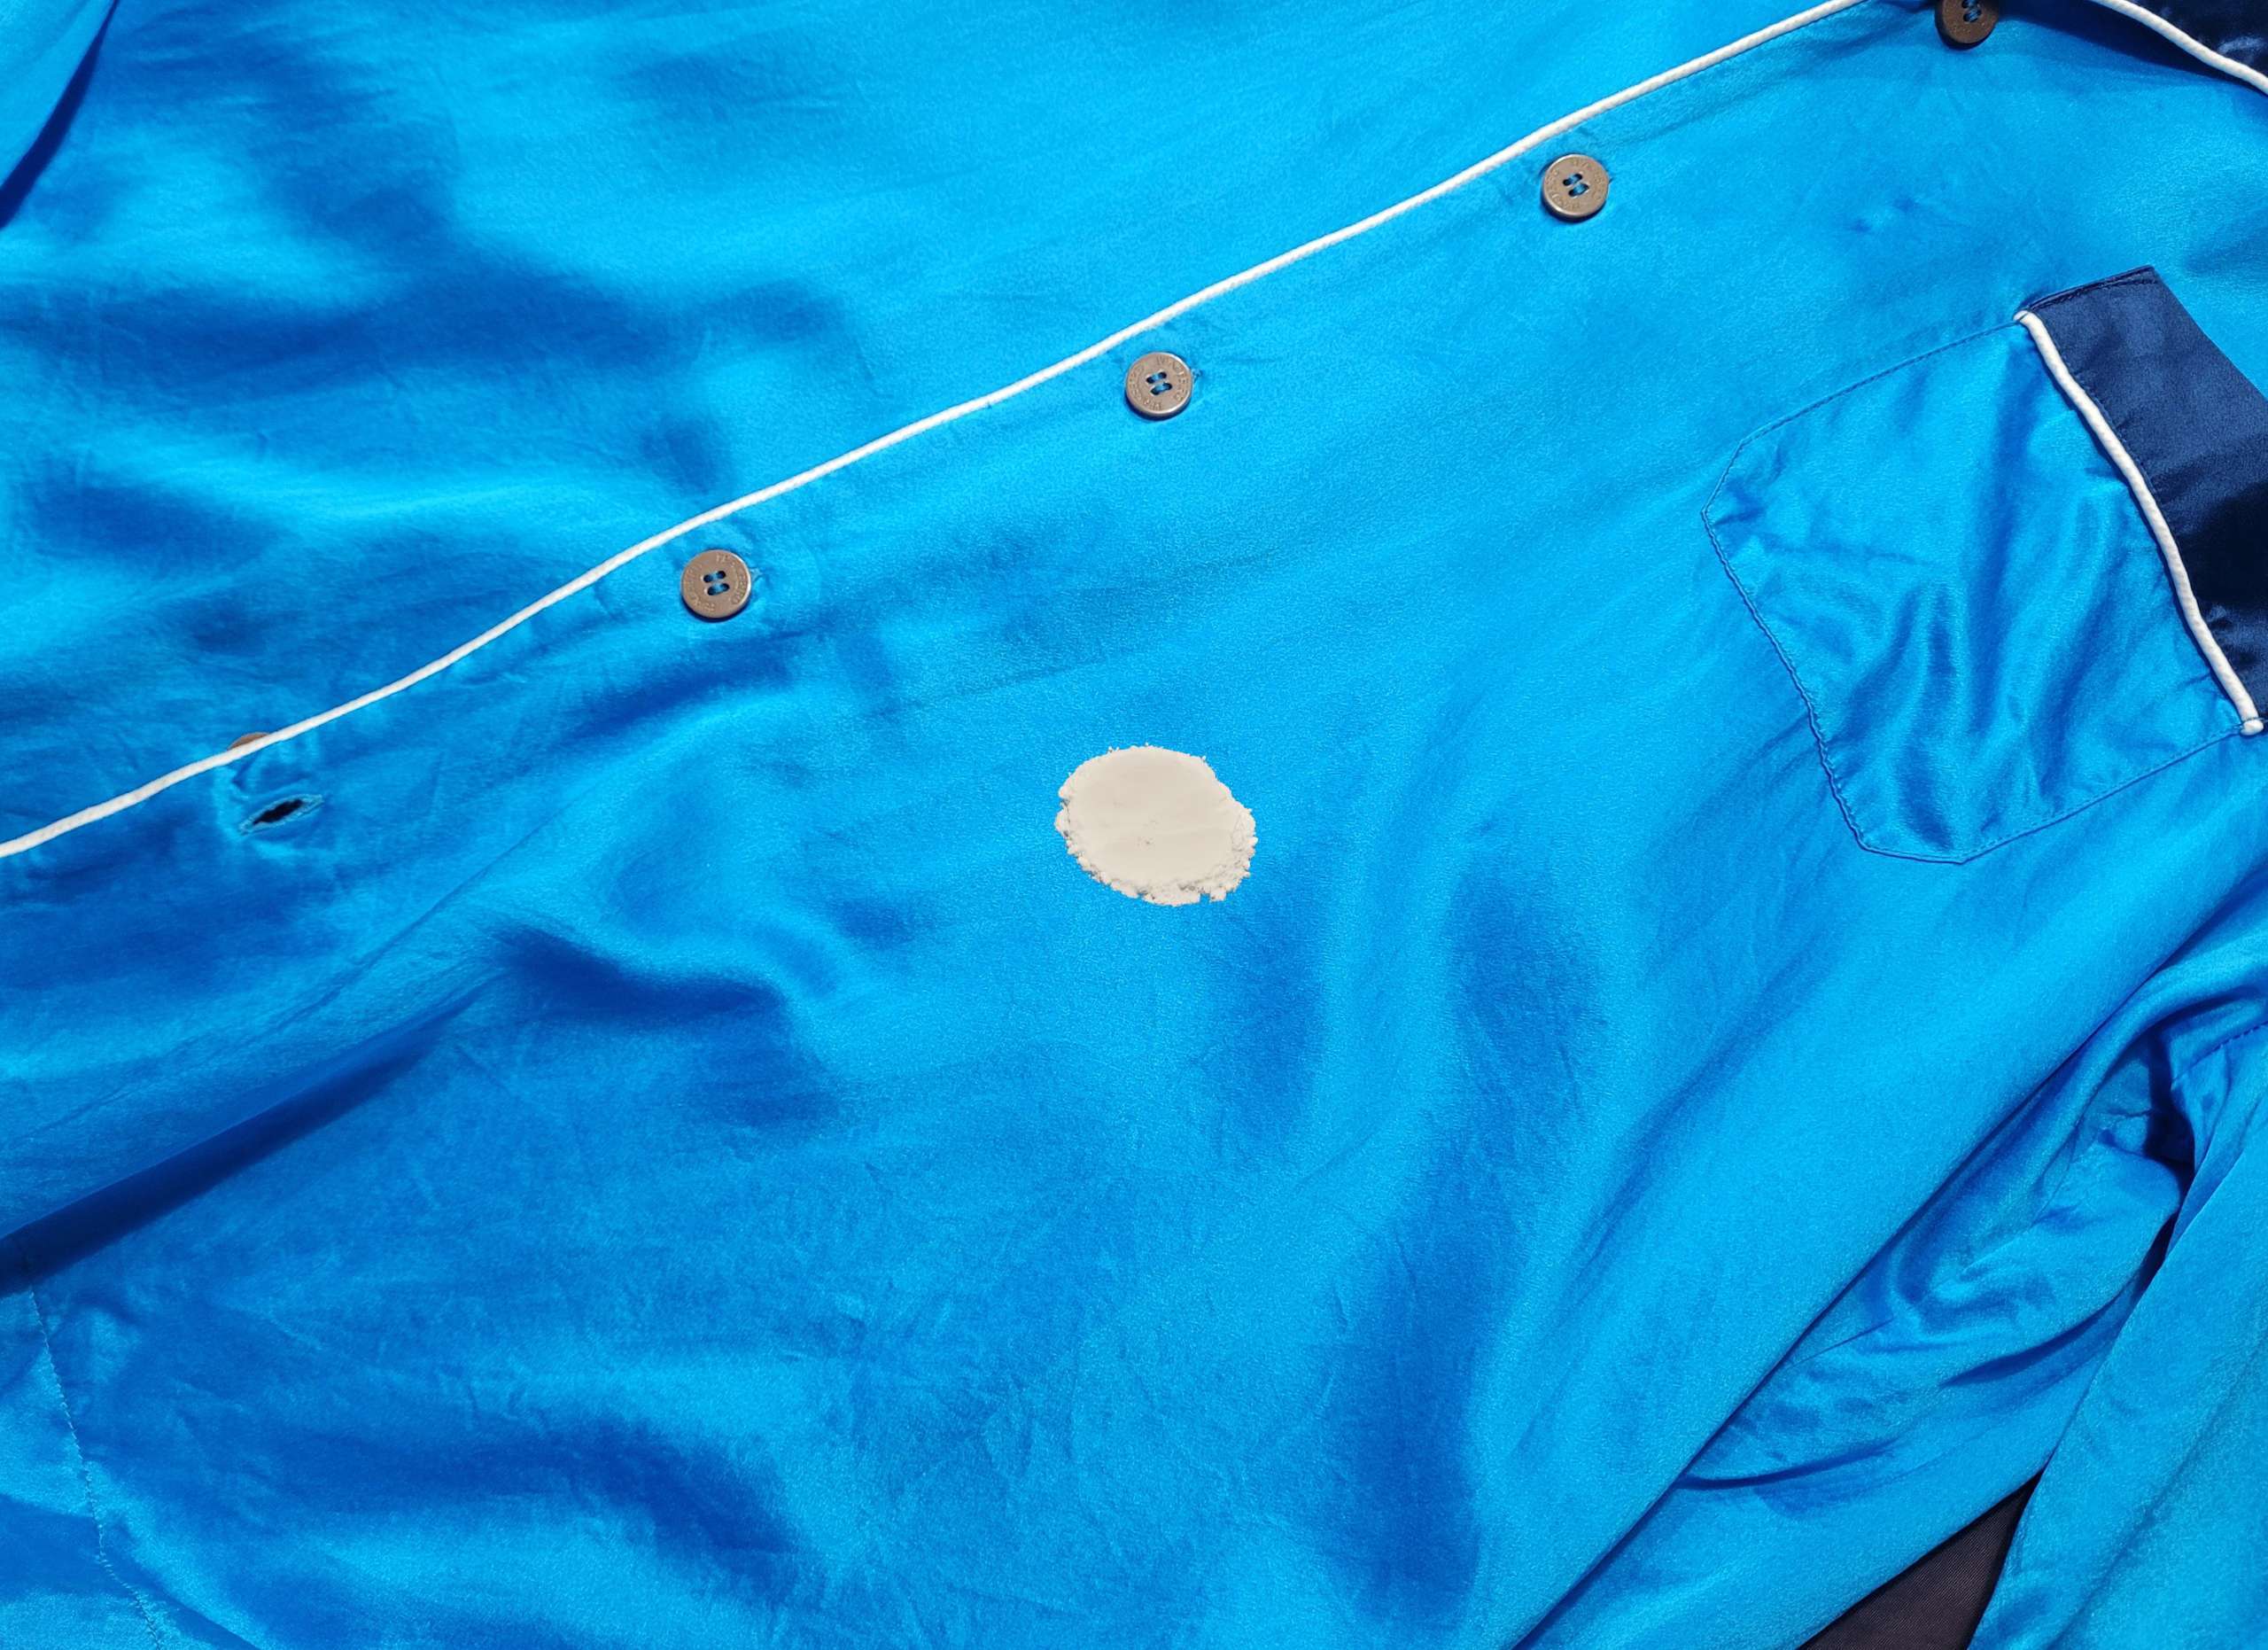 photo of baking soda being applied to a stain on silk pajamas